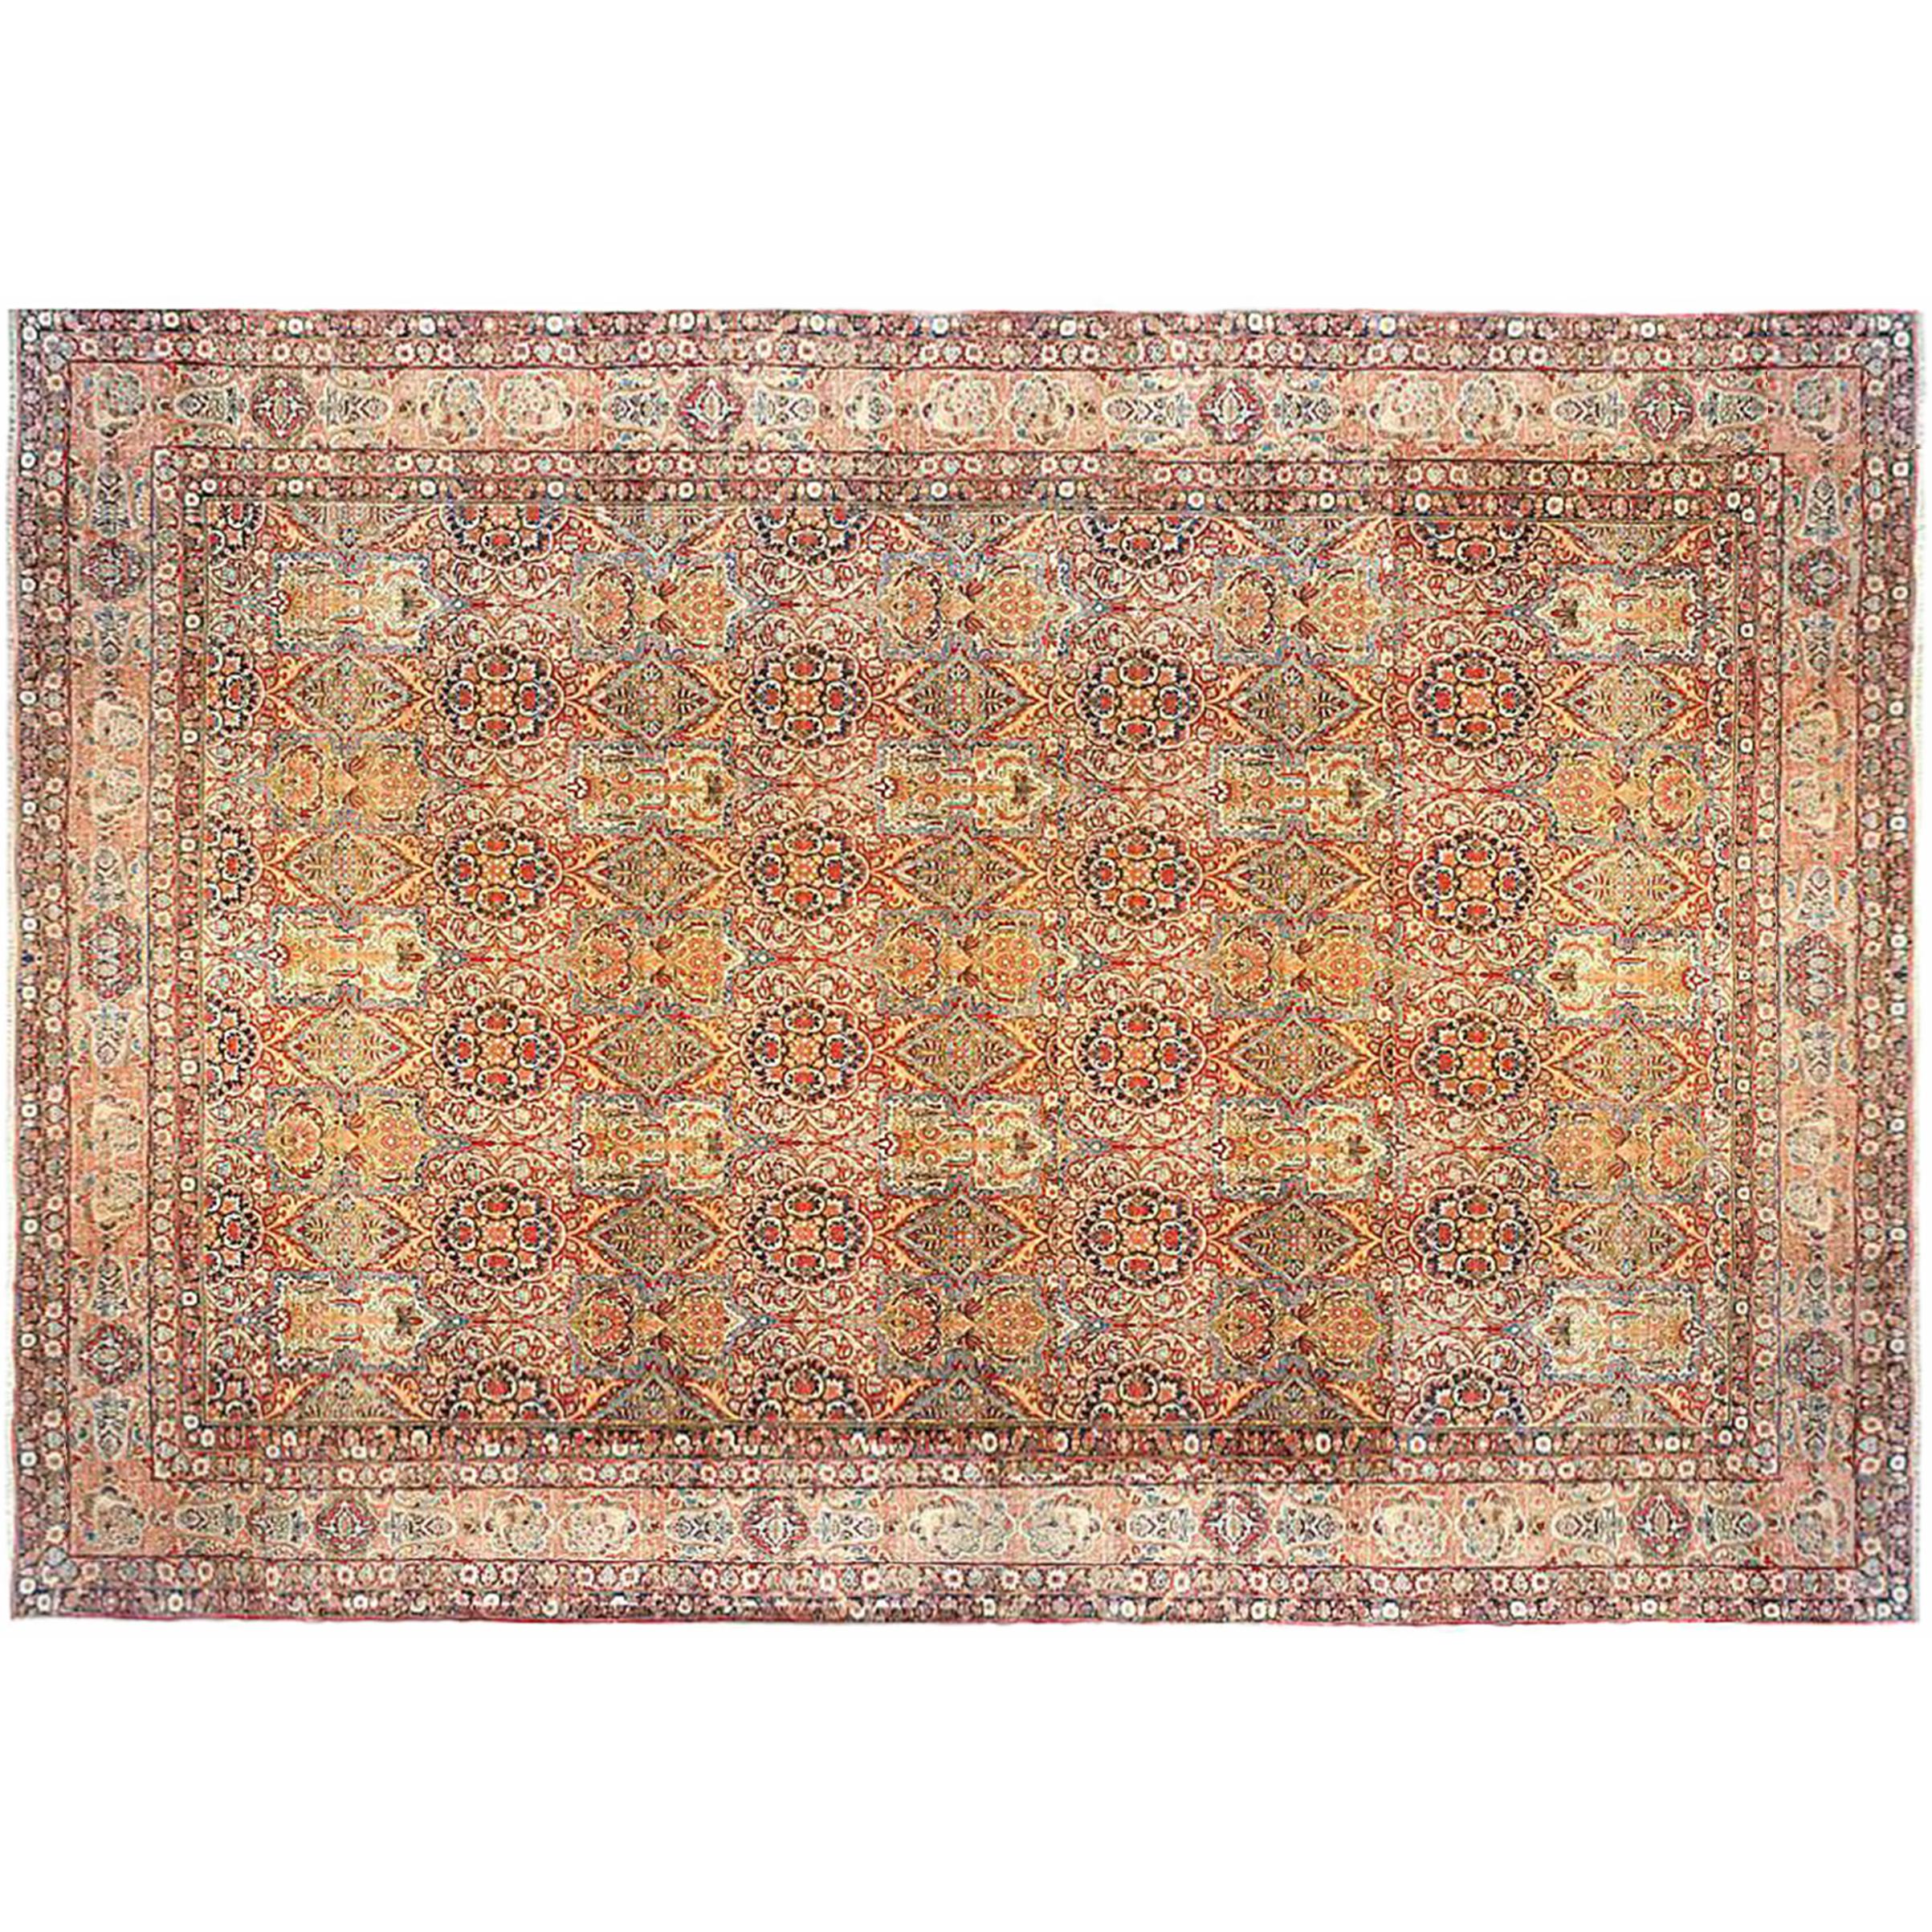 Antique Persian Lavar Oriental Rug, in Mansion Size, with Subdued Colors, c.1890 For Sale